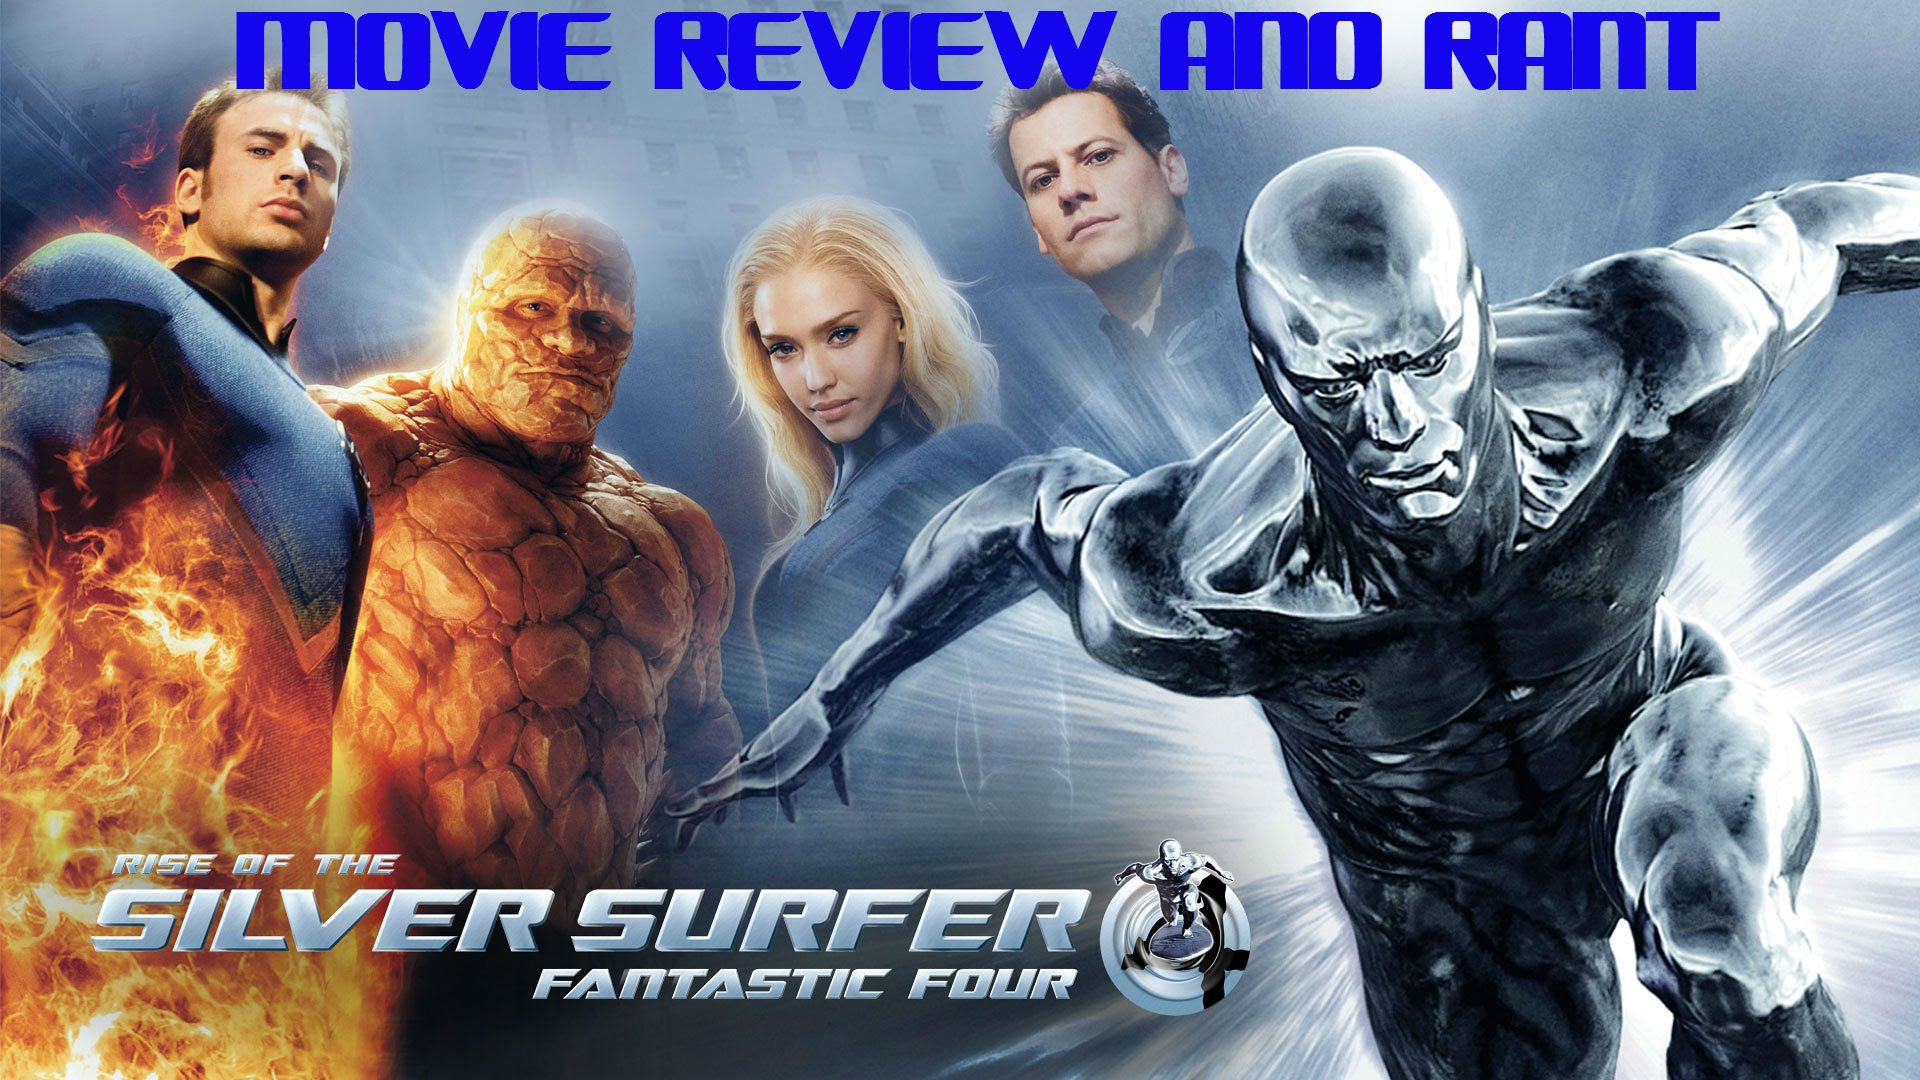 Fantastic 4: Rise Of The Silver Surfer #3